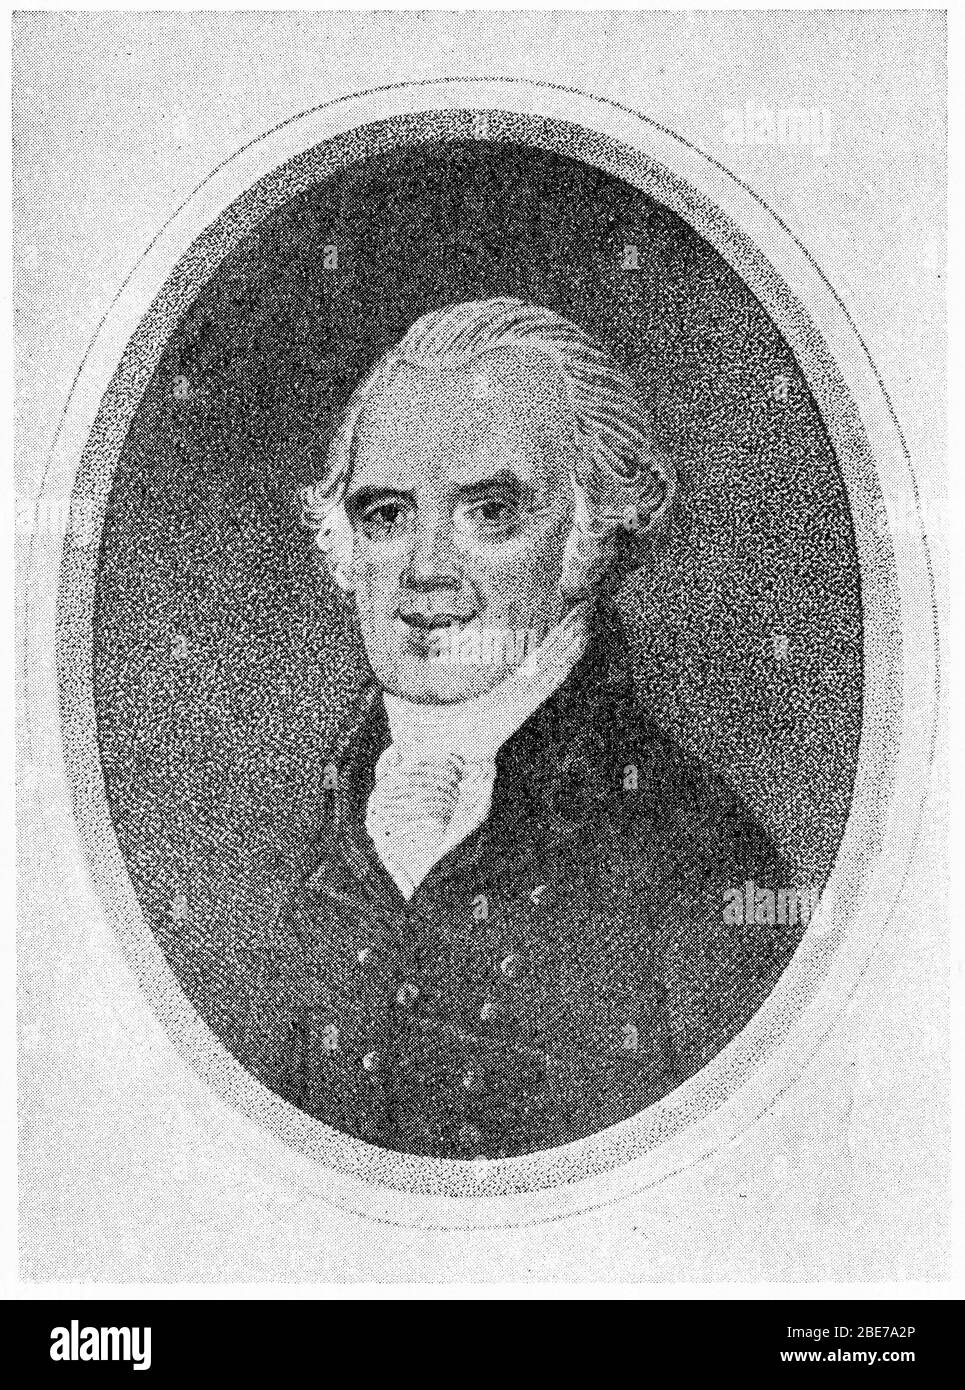 Engraved portrait of Isaiah Thomas (1749 – 1831)  American newspaper publisher and author. Thomas  performed the first public reading of the Declaration of Independence in Worcester, Massachusetts, and reported the first account of the Battles of Lexington and Concord. Founder of the American Antiquarian Society. Stock Photo